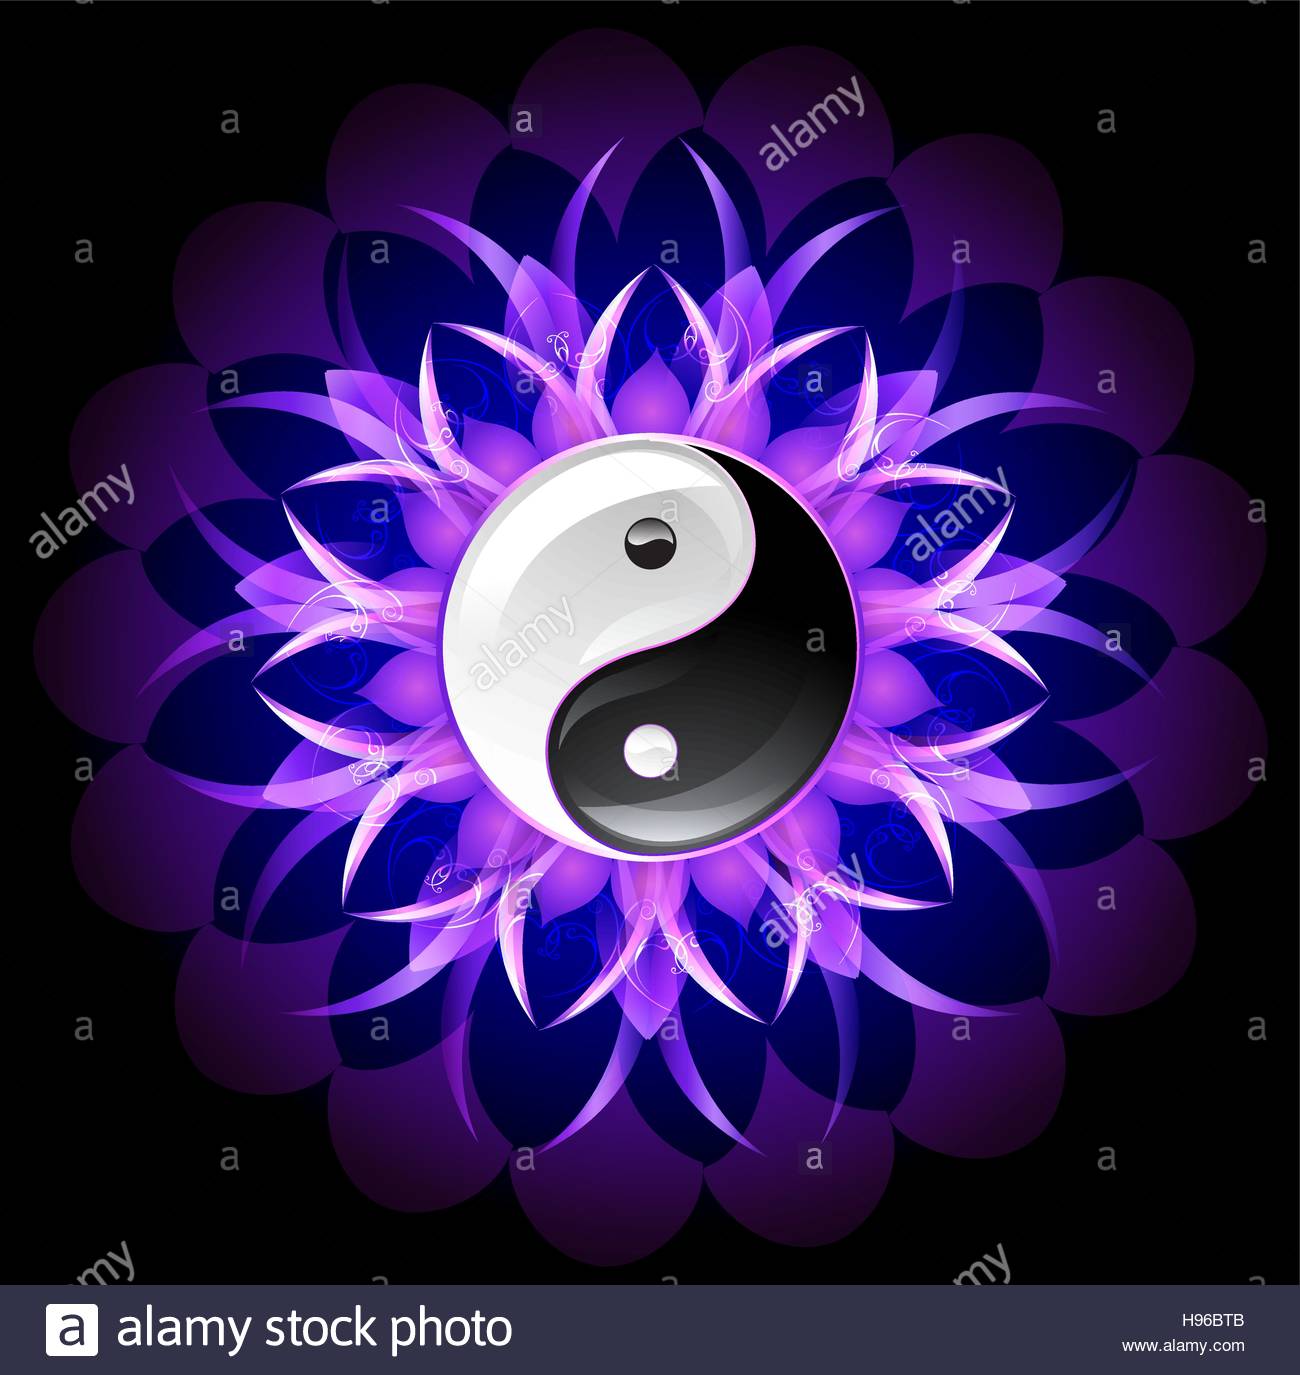 Glowing Purple Lotus With Yin Yang Symbol On A Black Background